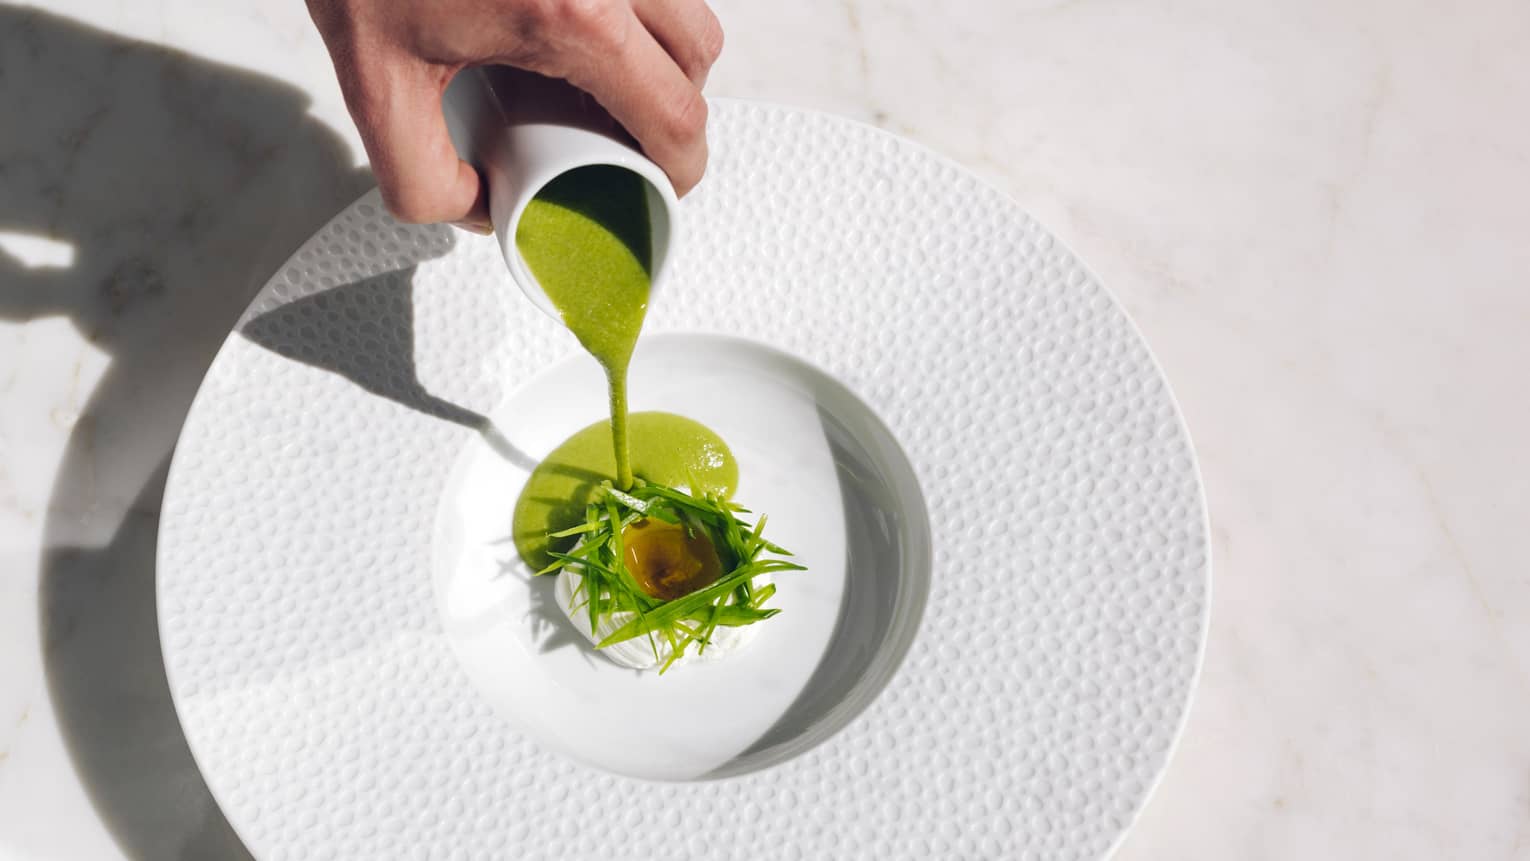 Spring Pea Soup being poured from cup into white bowl with green garnish